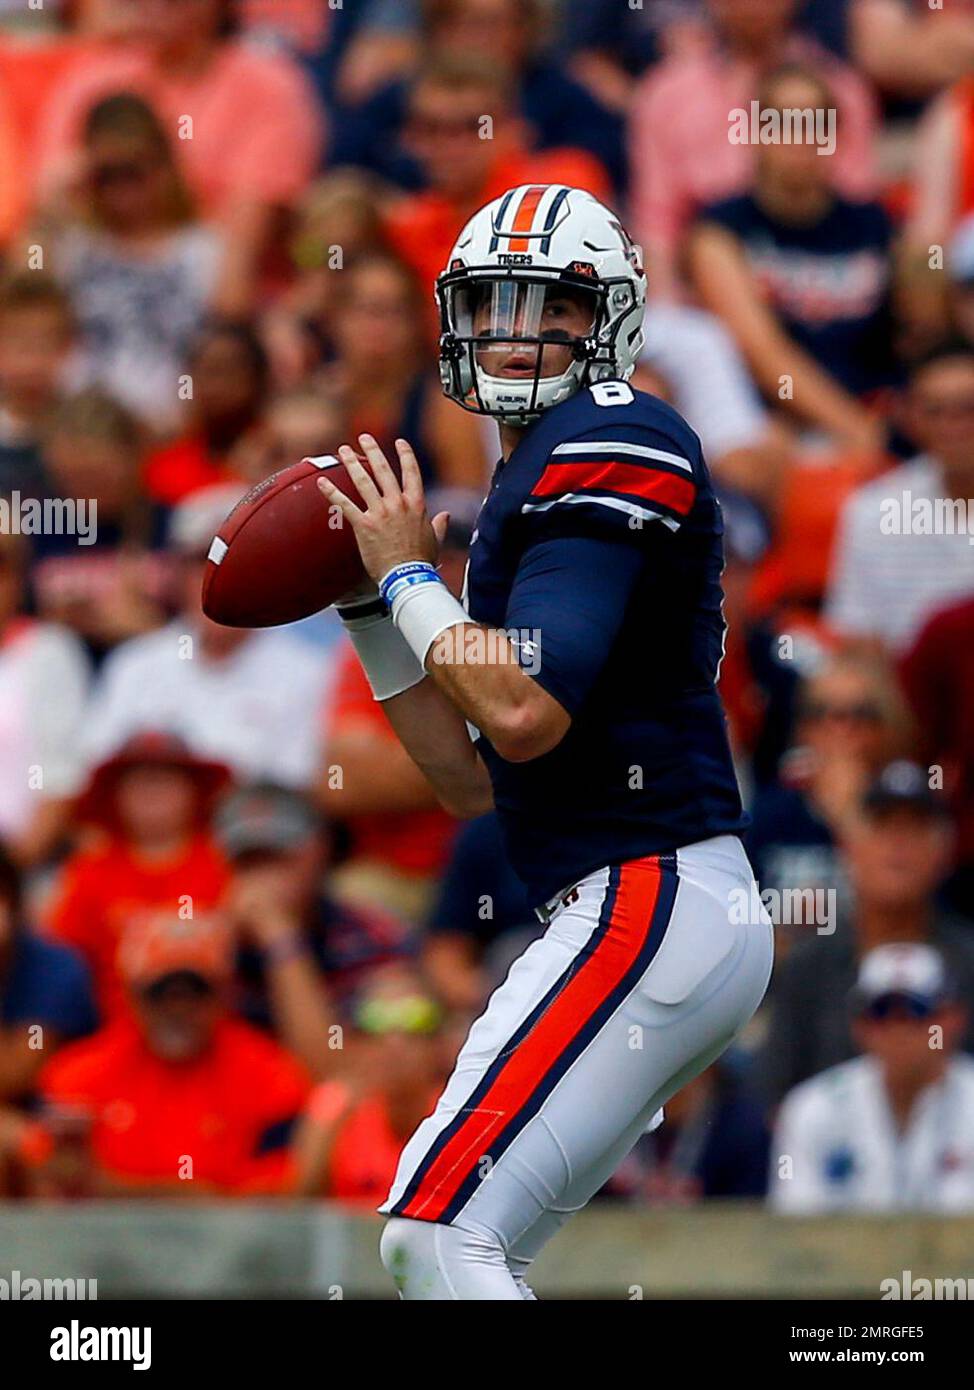 In this Sept. 8, 2018 photo Auburn quarterback Jarrett Stidham (8) warms up  before an NCAA college football game against Alabama State in Auburn, Ala.  The stage is set for another thriller